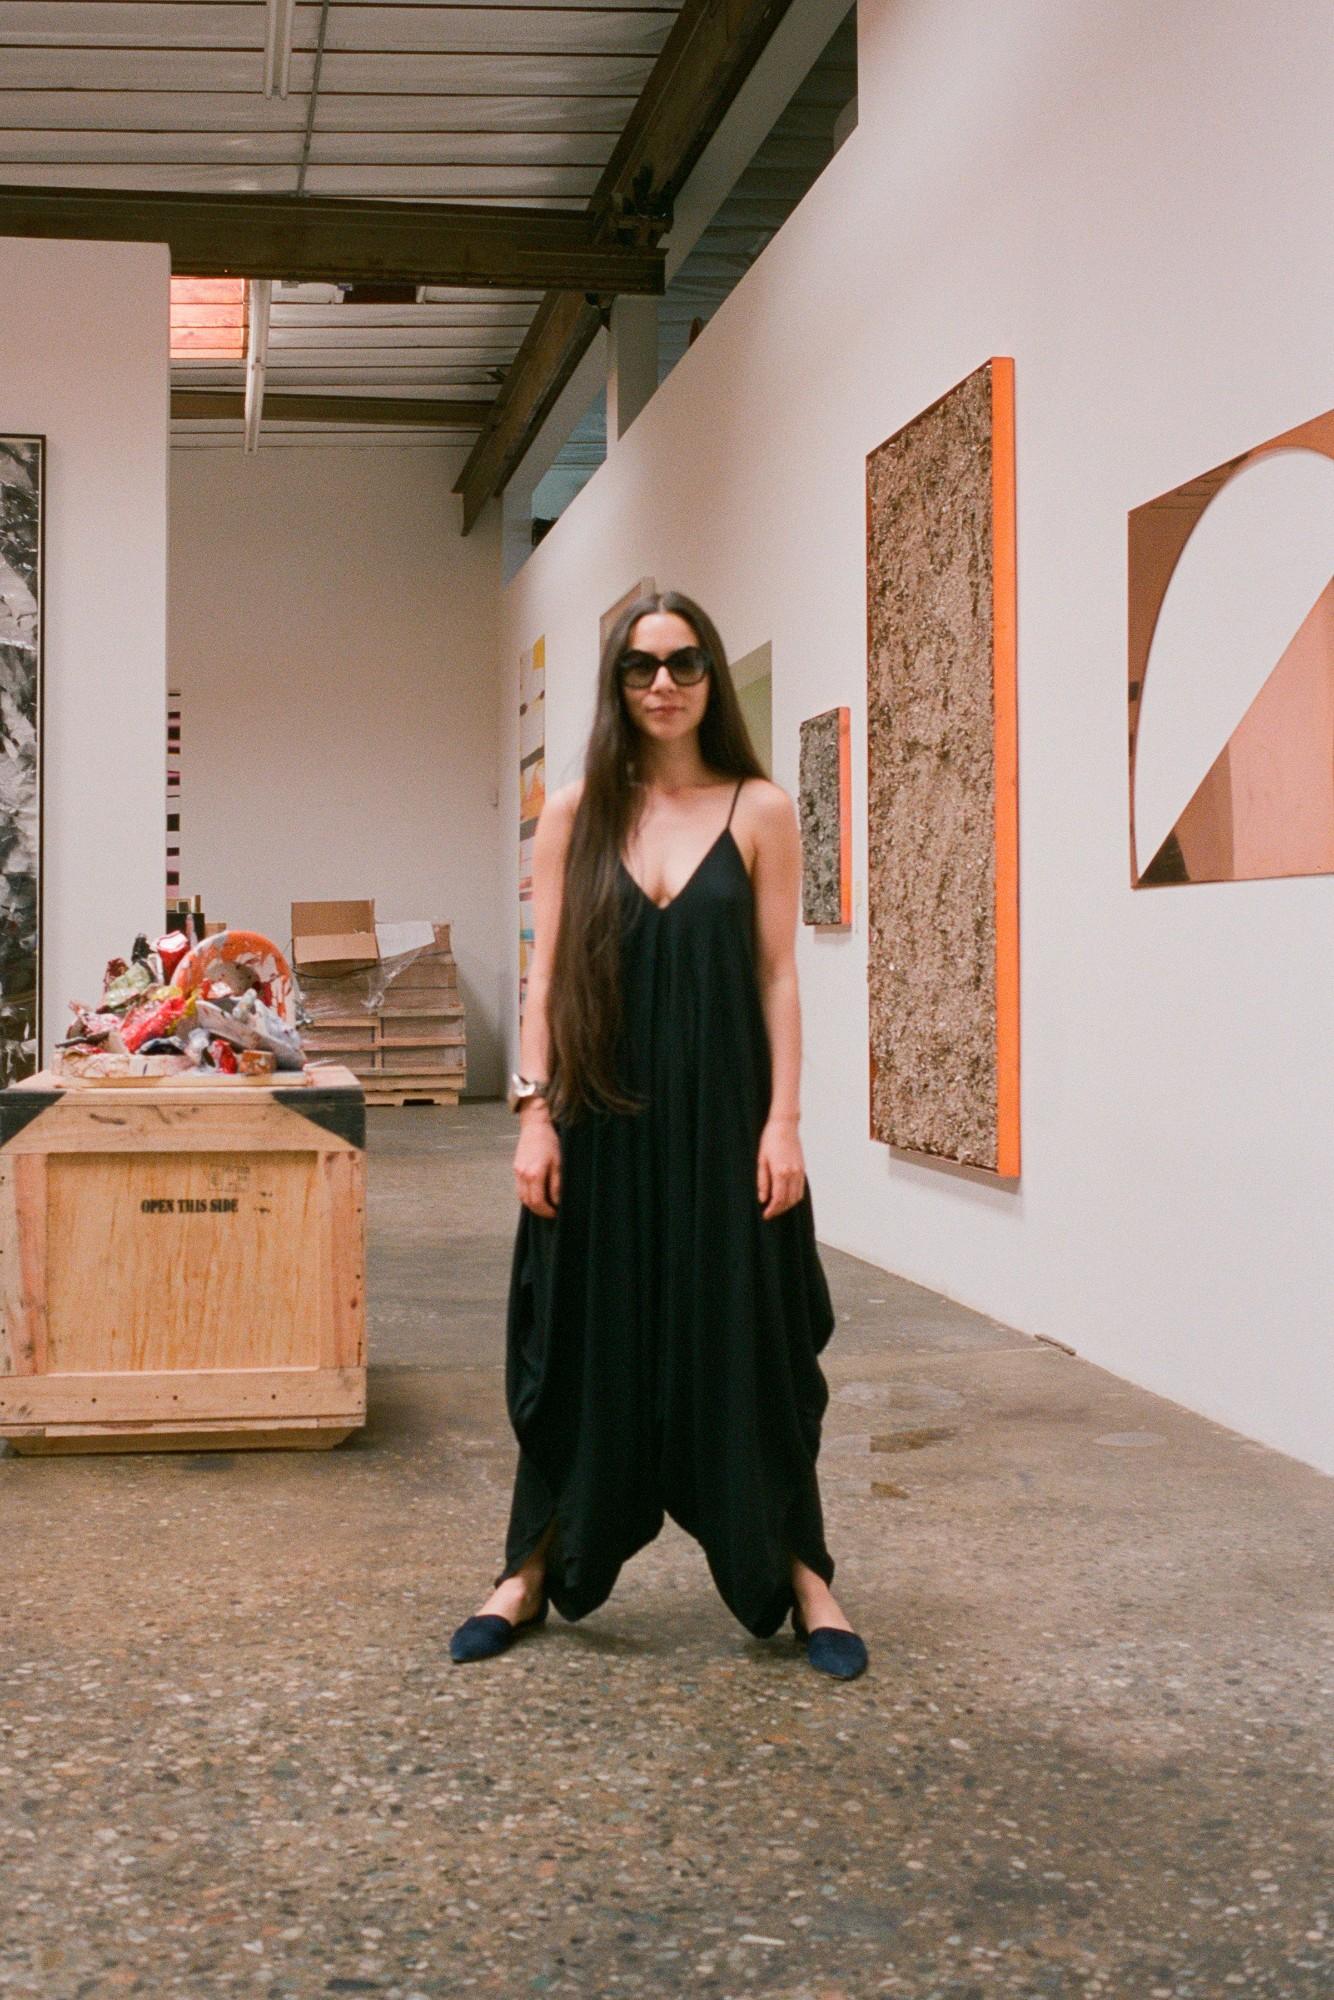 Walead Besht photograph portrait of a woman in large sunglasses and chic black outfit in an art gallery